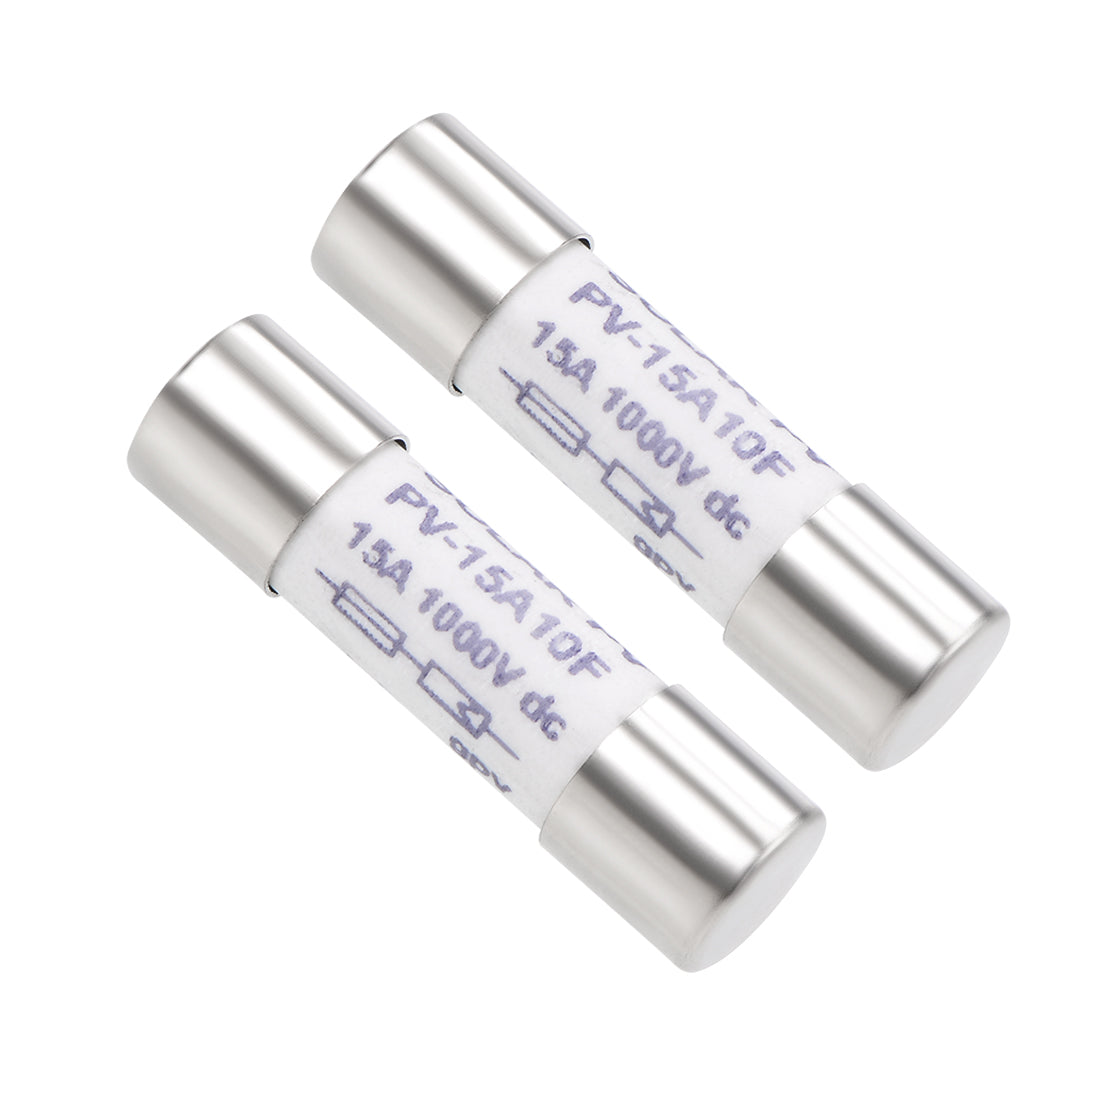 uxcell Uxcell Cartridge Fuses 15A 1000V 10x38mm Fast Blow Amplifier Ceramic 2pcs